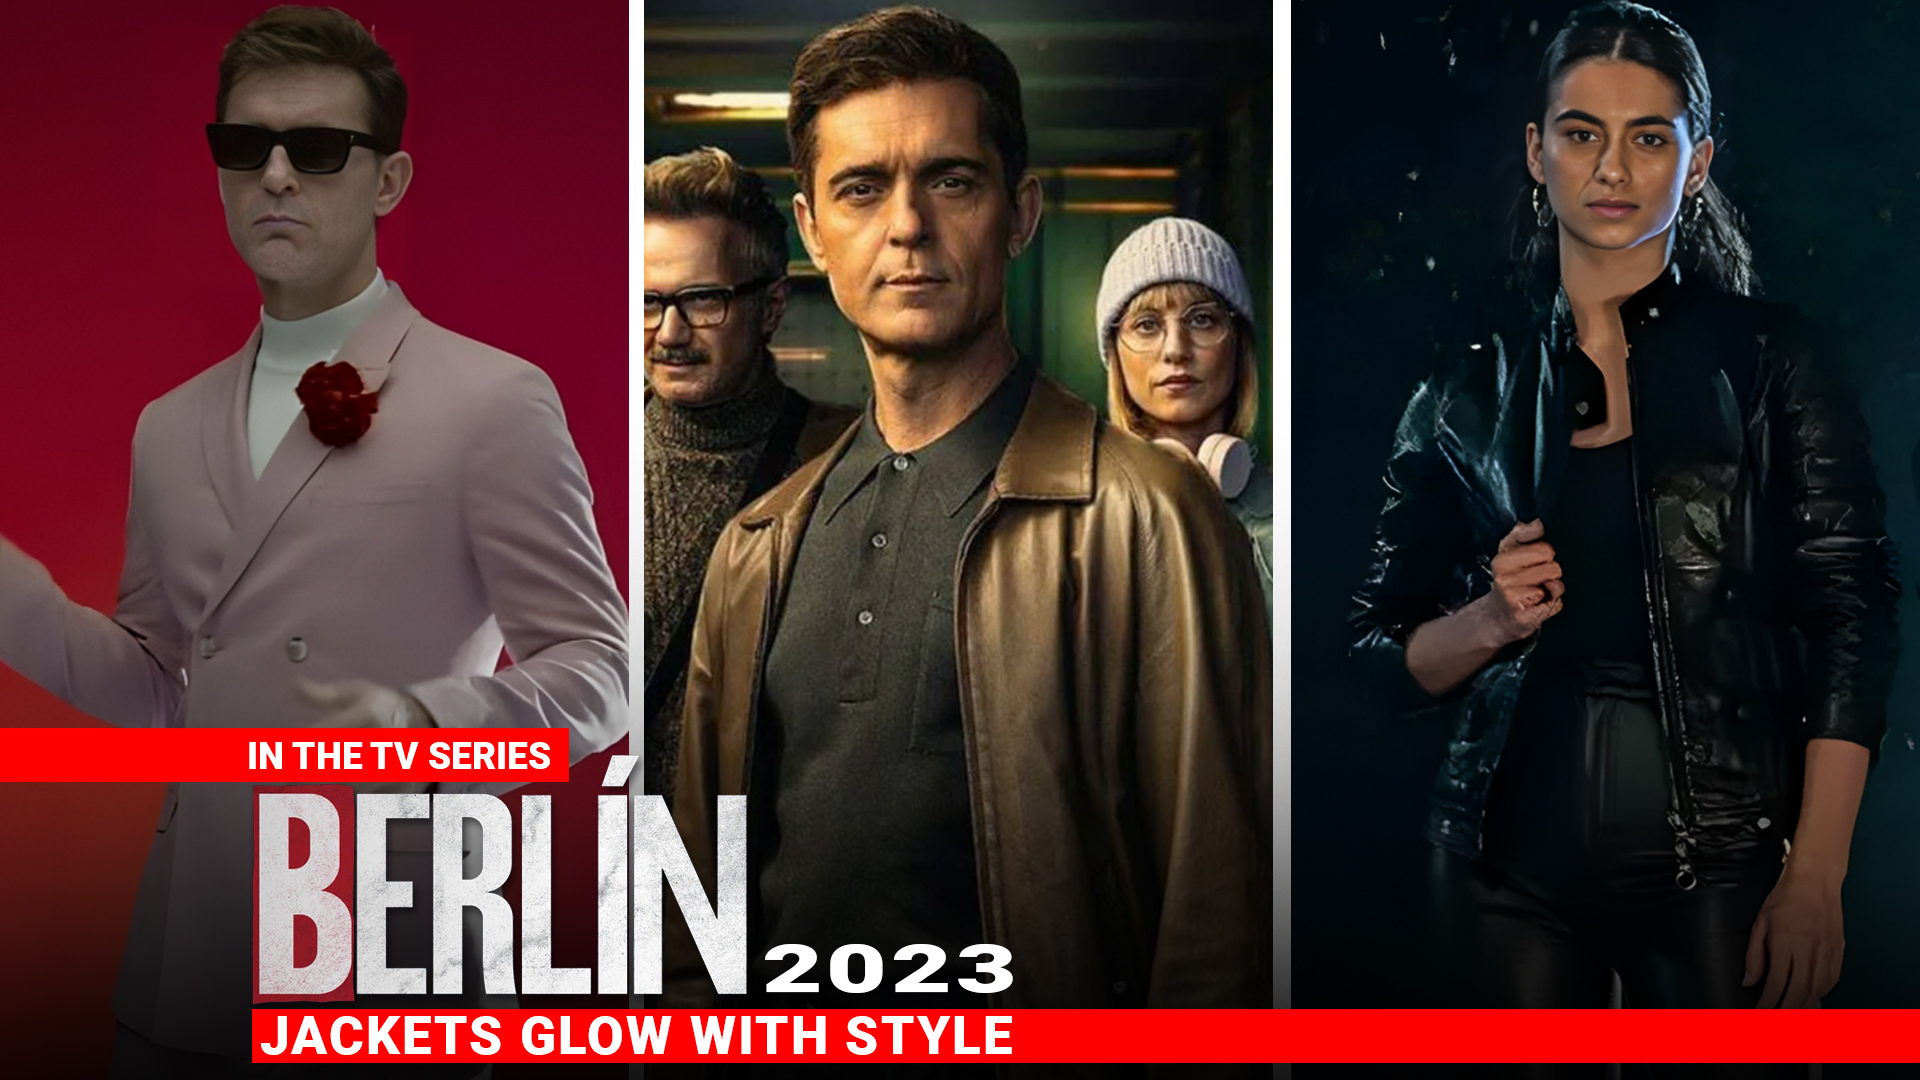 In The TV Series Berlin 2023 Jackets Glow With Style